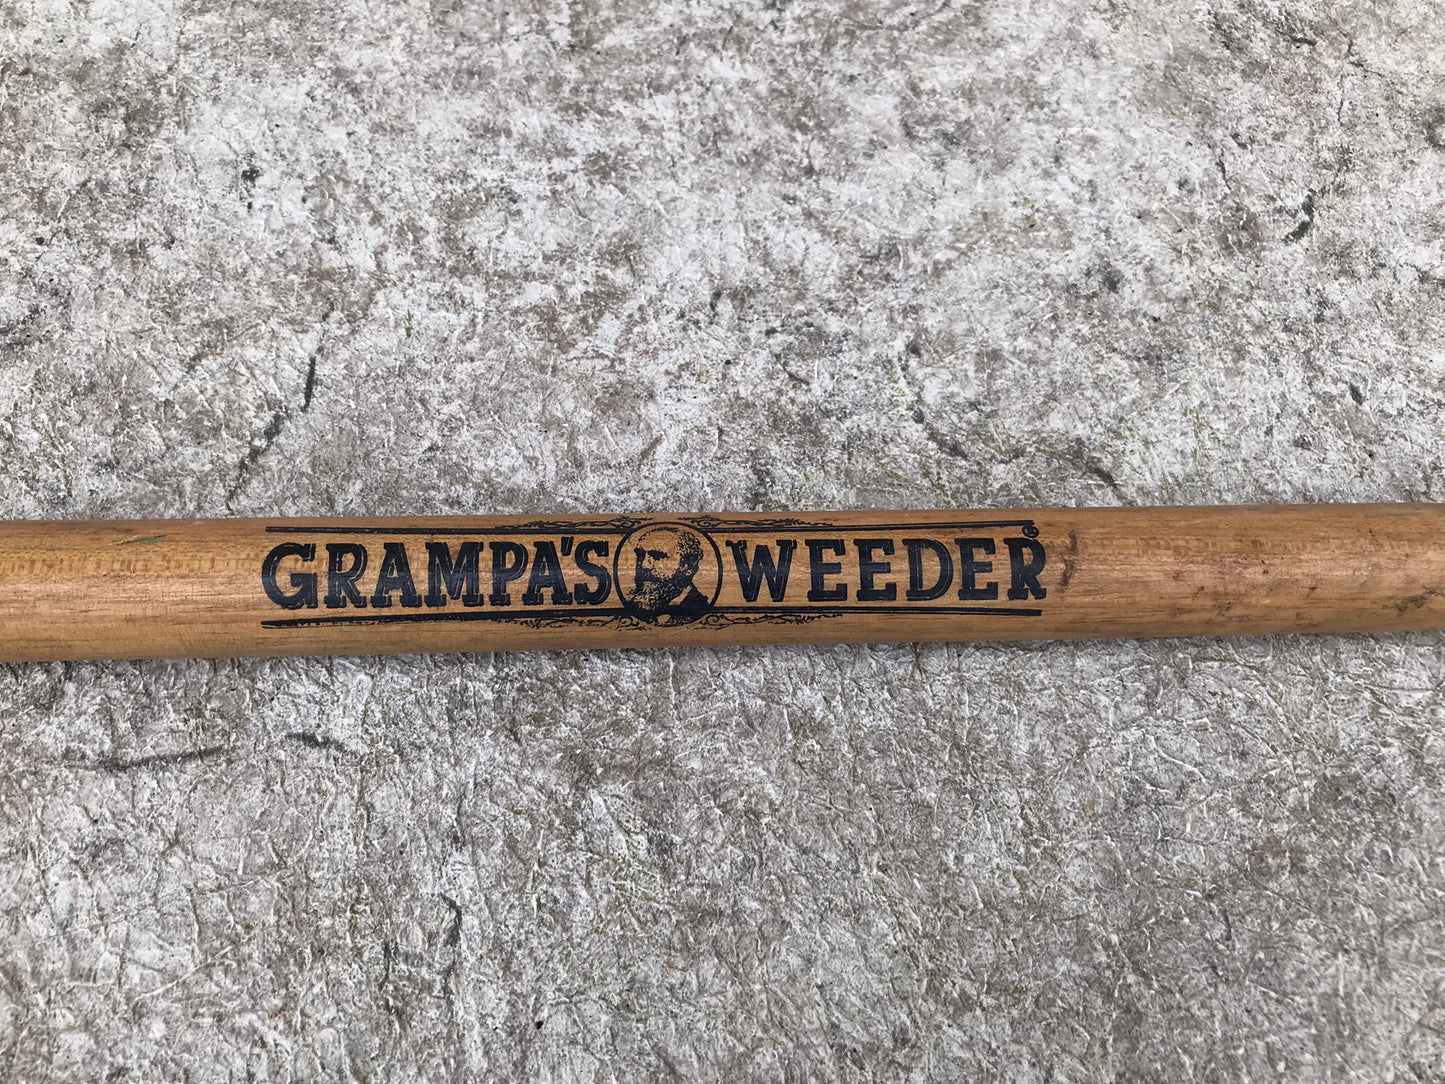 Farm and Garden Grandpa Weeder Excellent Best Tool To Remove Garden and Grass Weeds